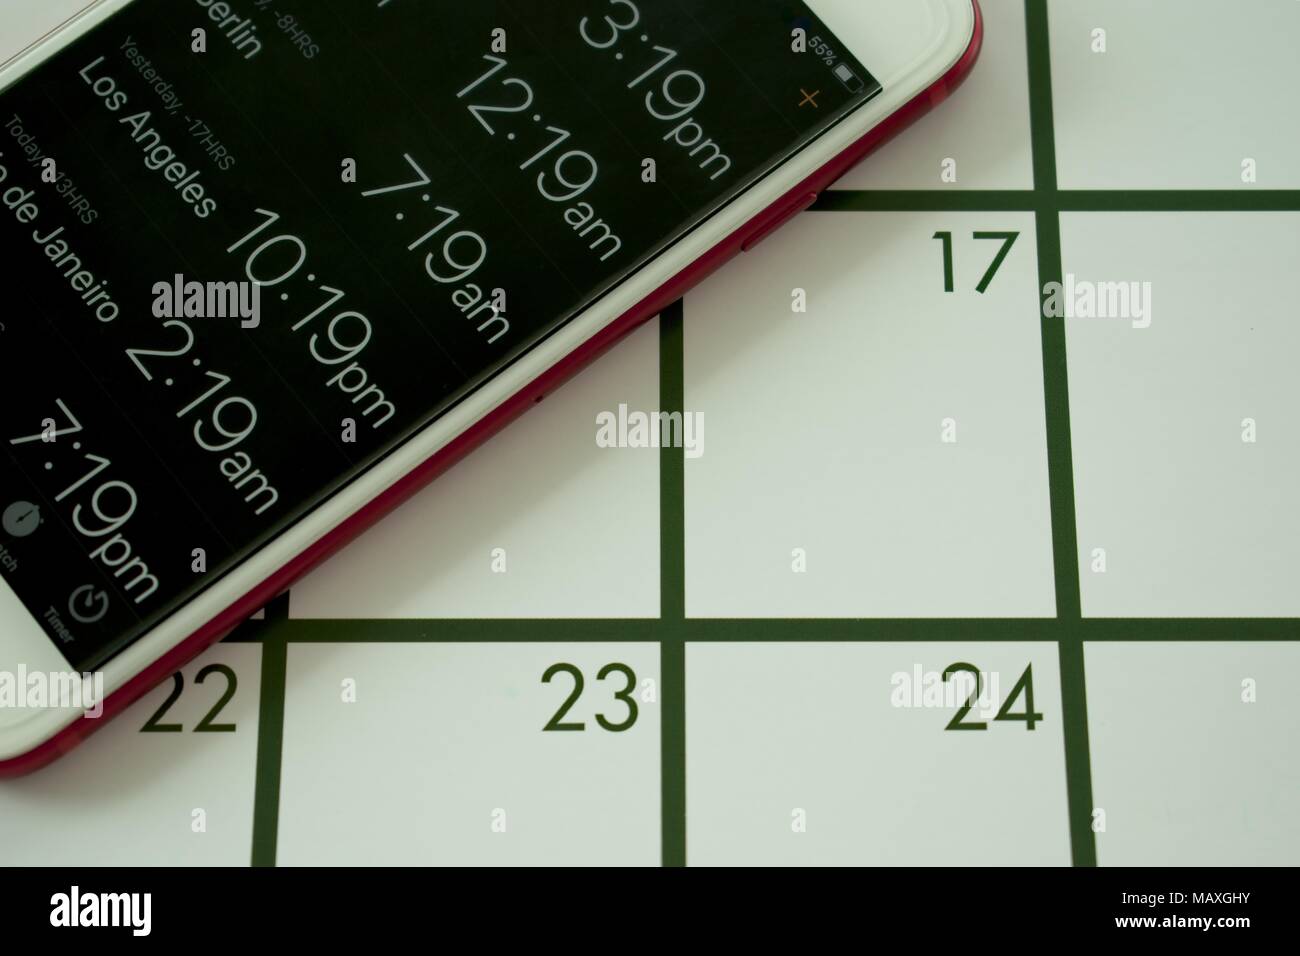 A calendar and world clock on mobile phone are used to travel to different time zones Stock Photo